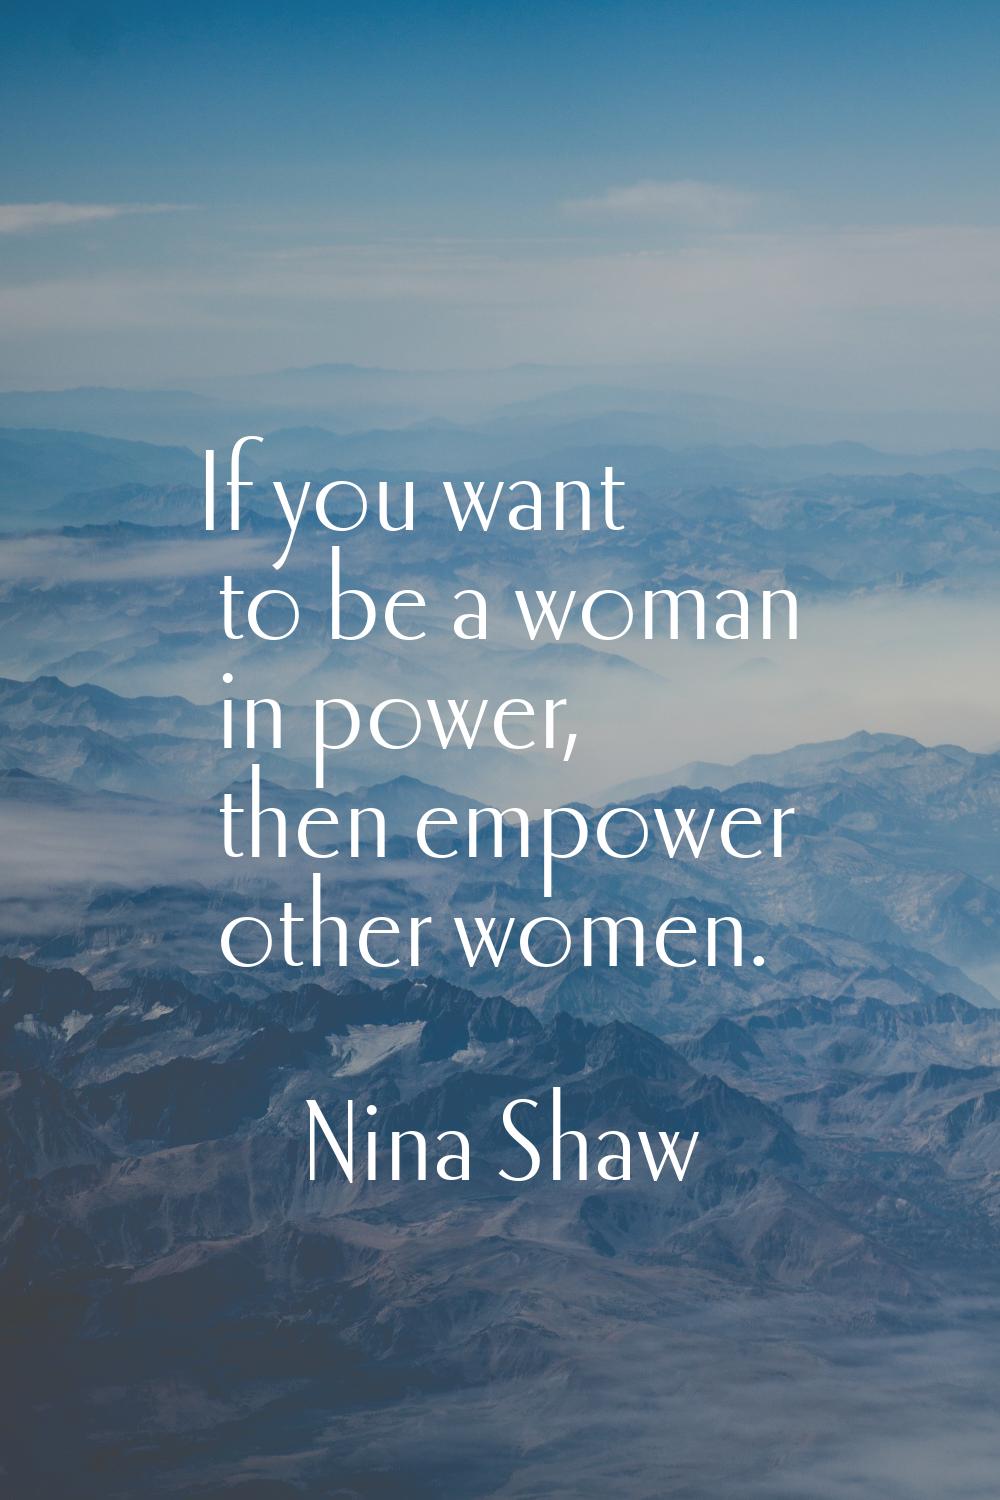 If you want to be a woman in power, then empower other women.